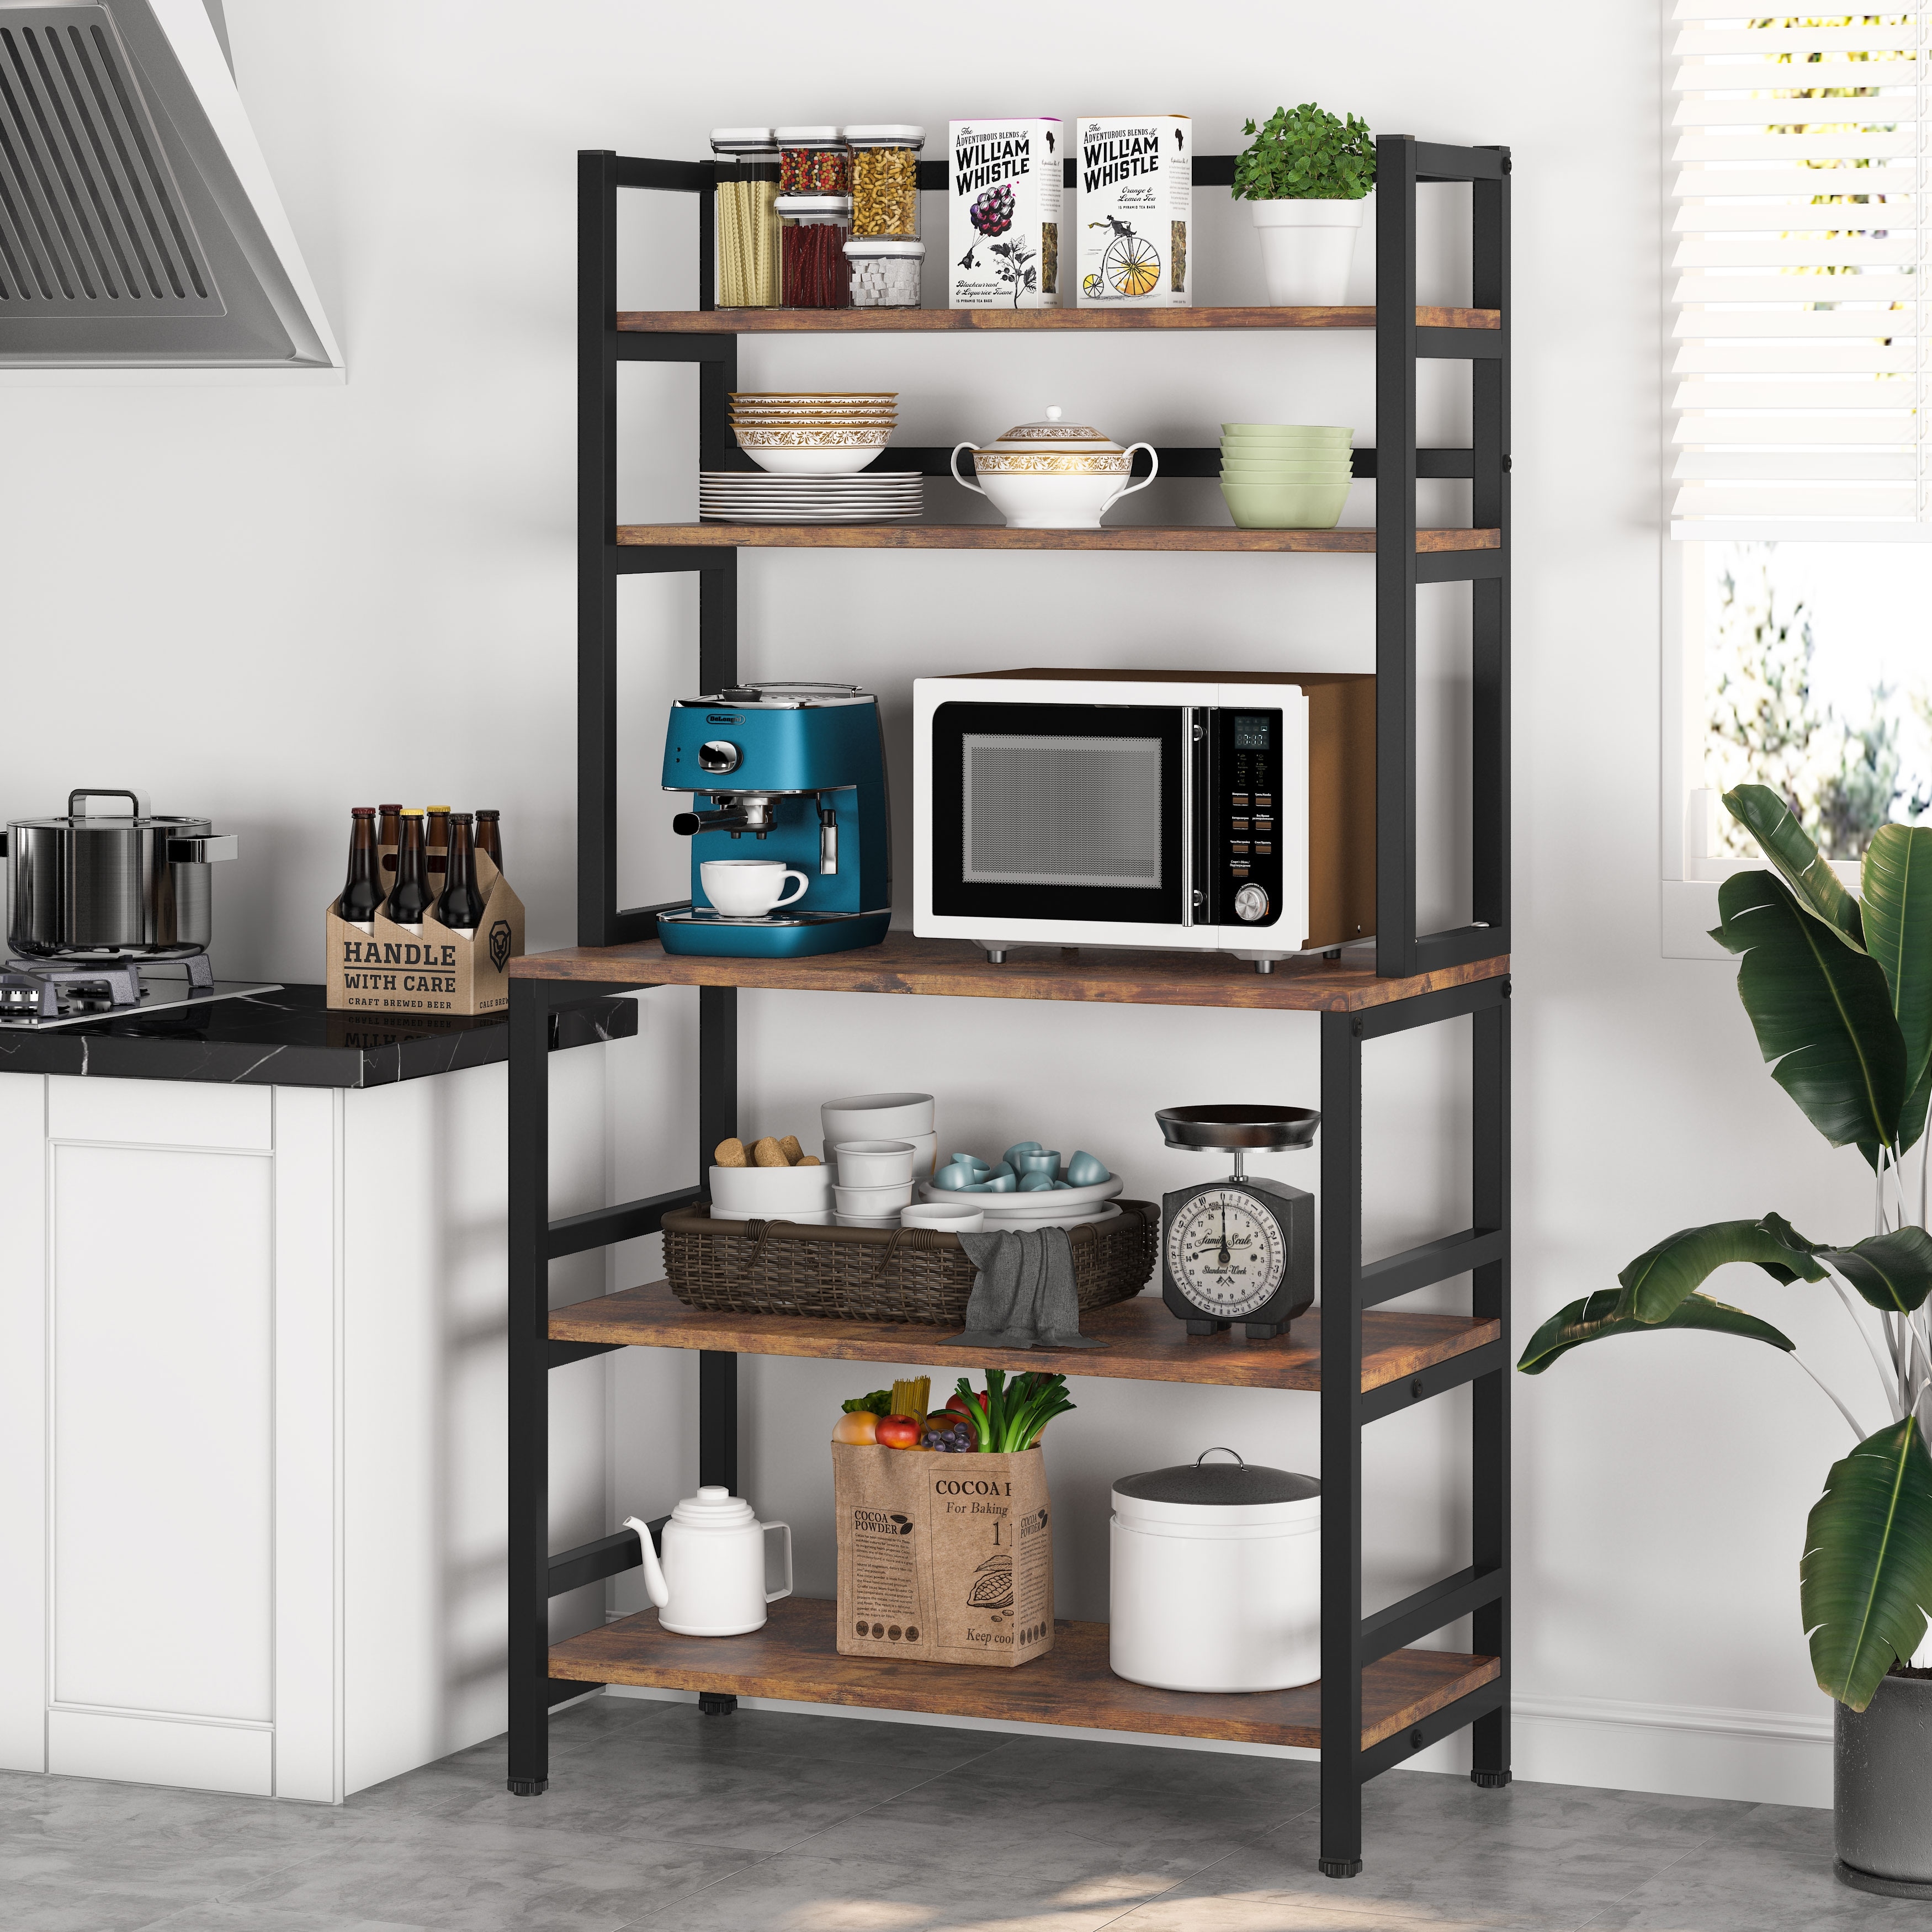 https://ak1.ostkcdn.com/images/products/is/images/direct/aeae600e16f77fc2dca04fc18cfae83a64c3a7be/5-Tier-Industrial-Kitchen-Baker%27s-Rack-Microwave-Stand-Utility.jpg